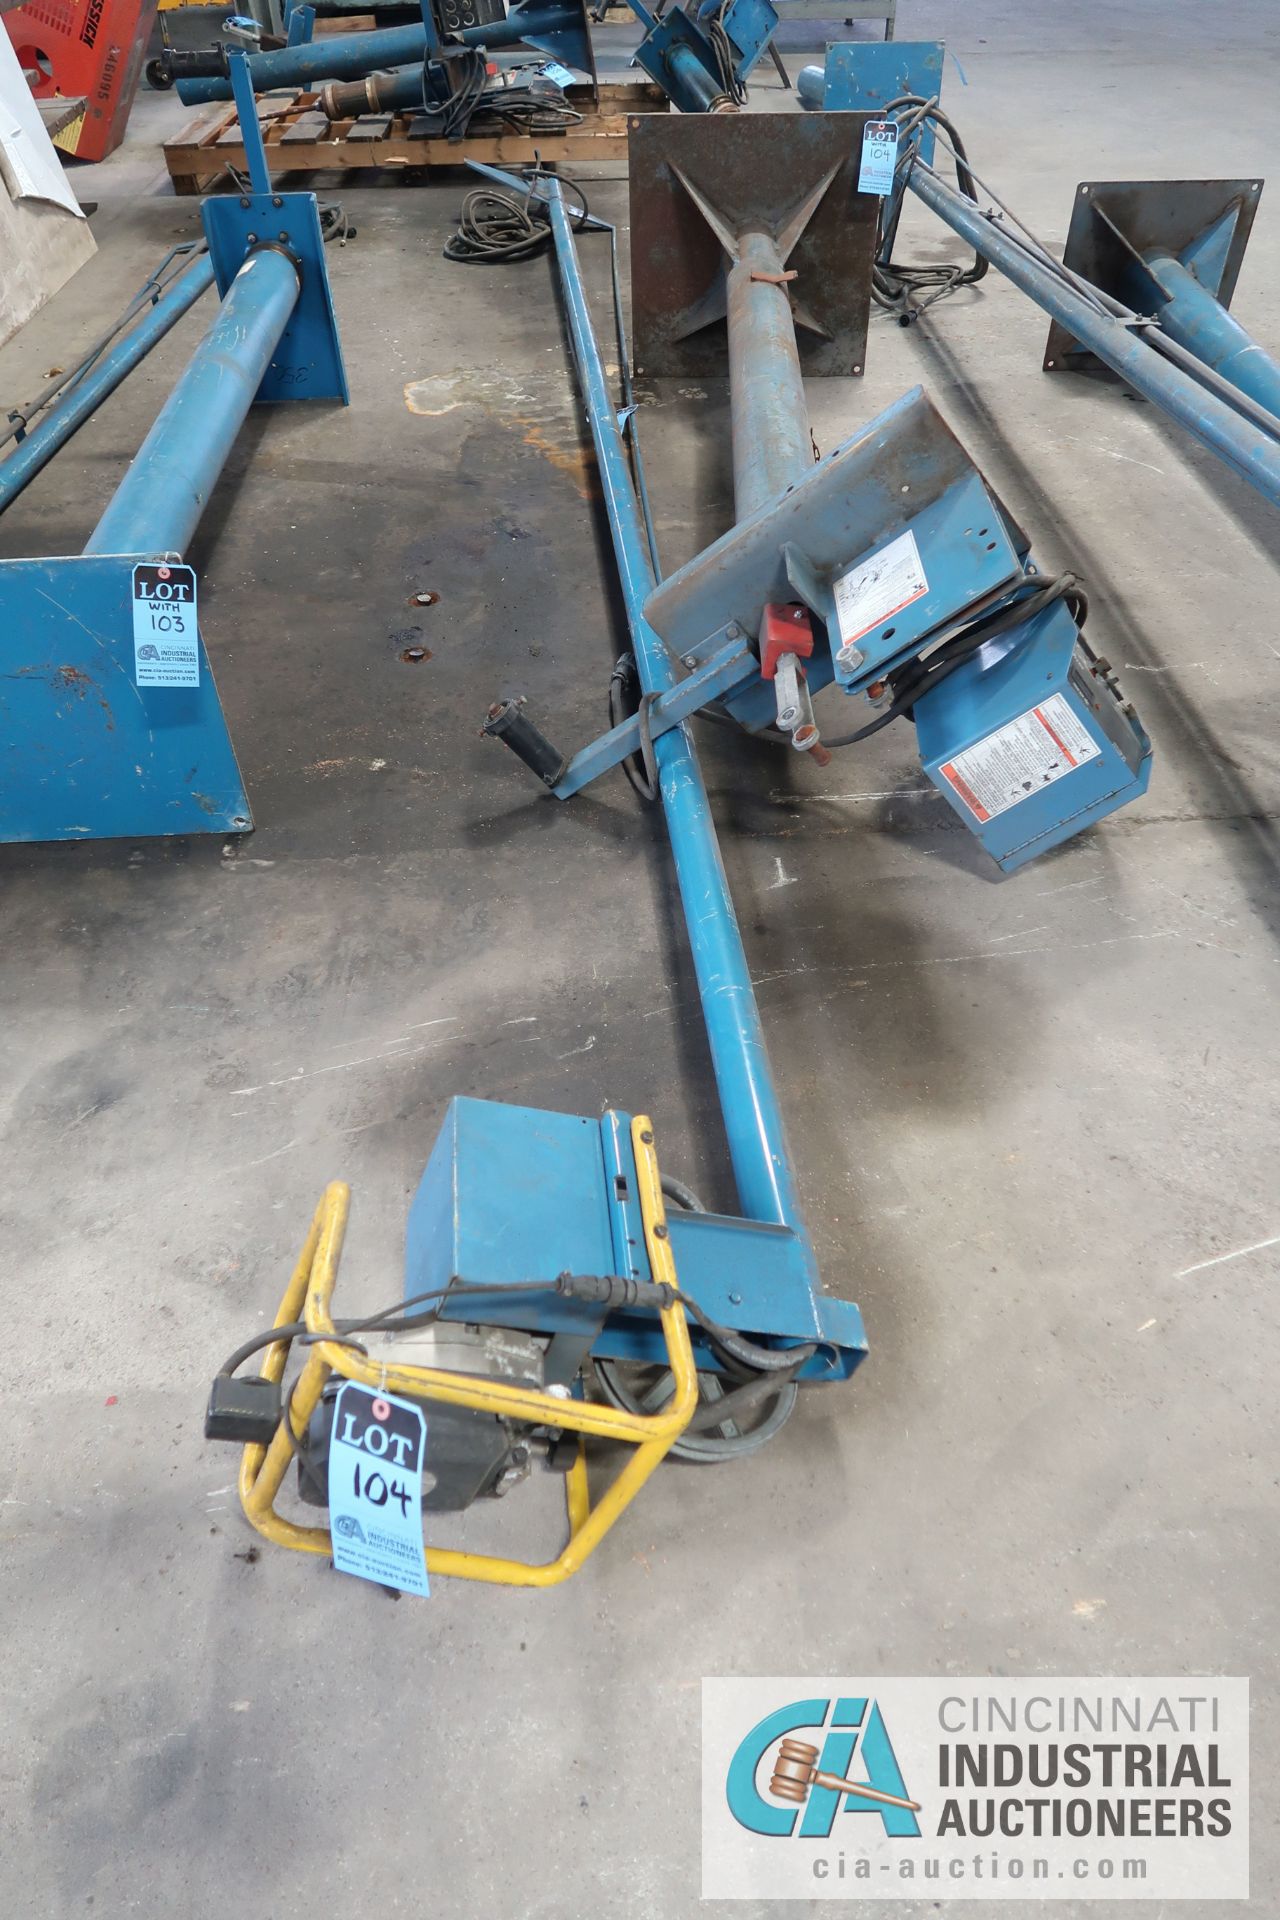 87" HIGH (APPROX.) BASE X 16' BOOM MILLER CV SINGARC BOOM MOUNTED SINGLE WIRE FEEDER SYSTEM WITH